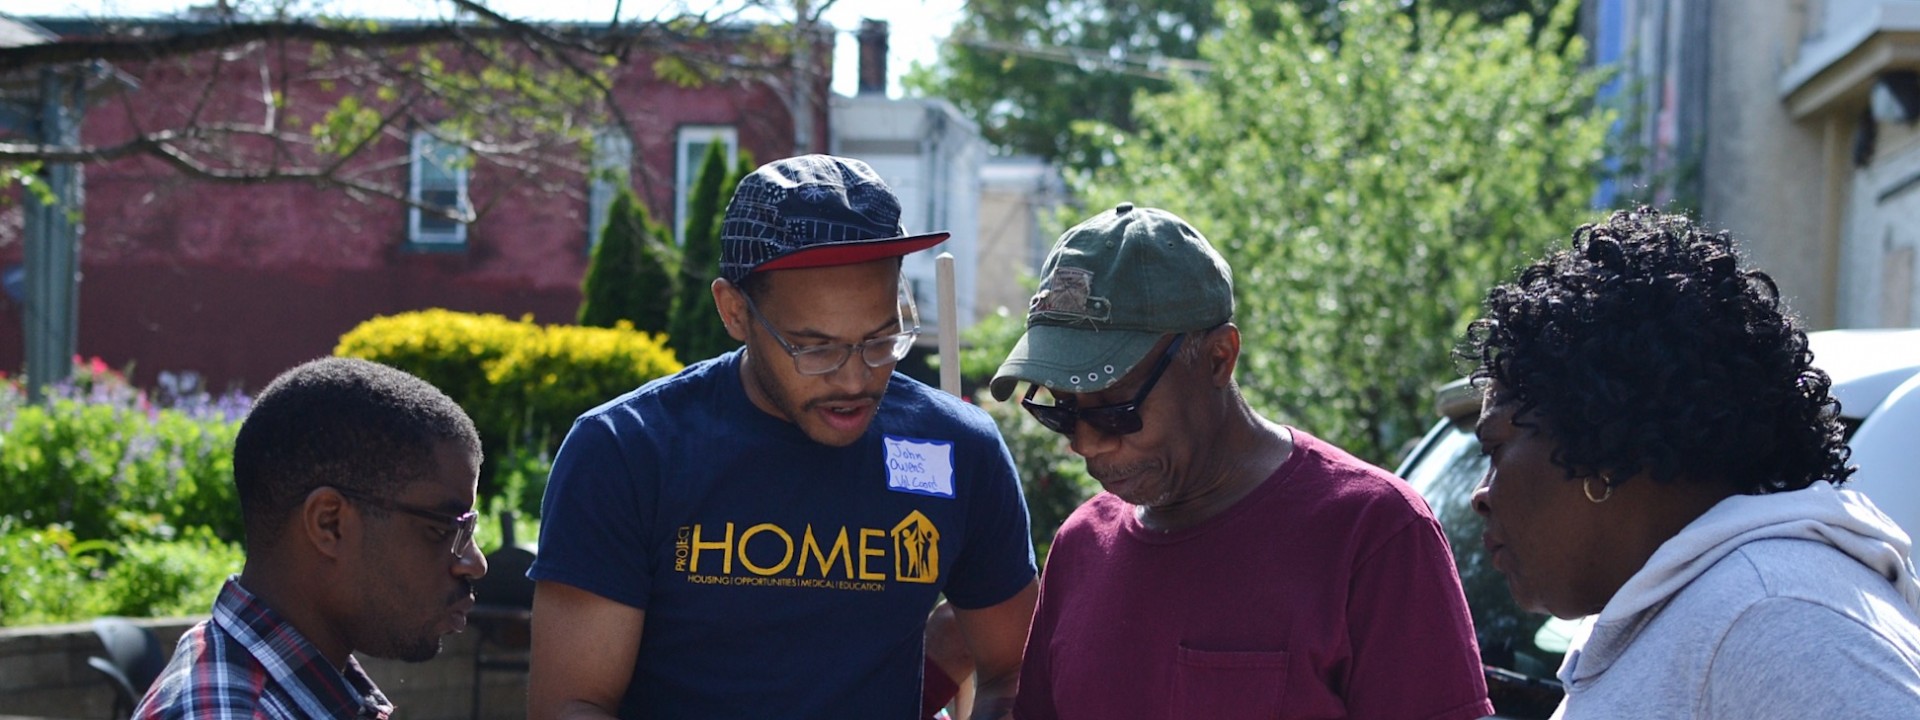 Project HOME volunteers coordinating during a neighborhood clean up day